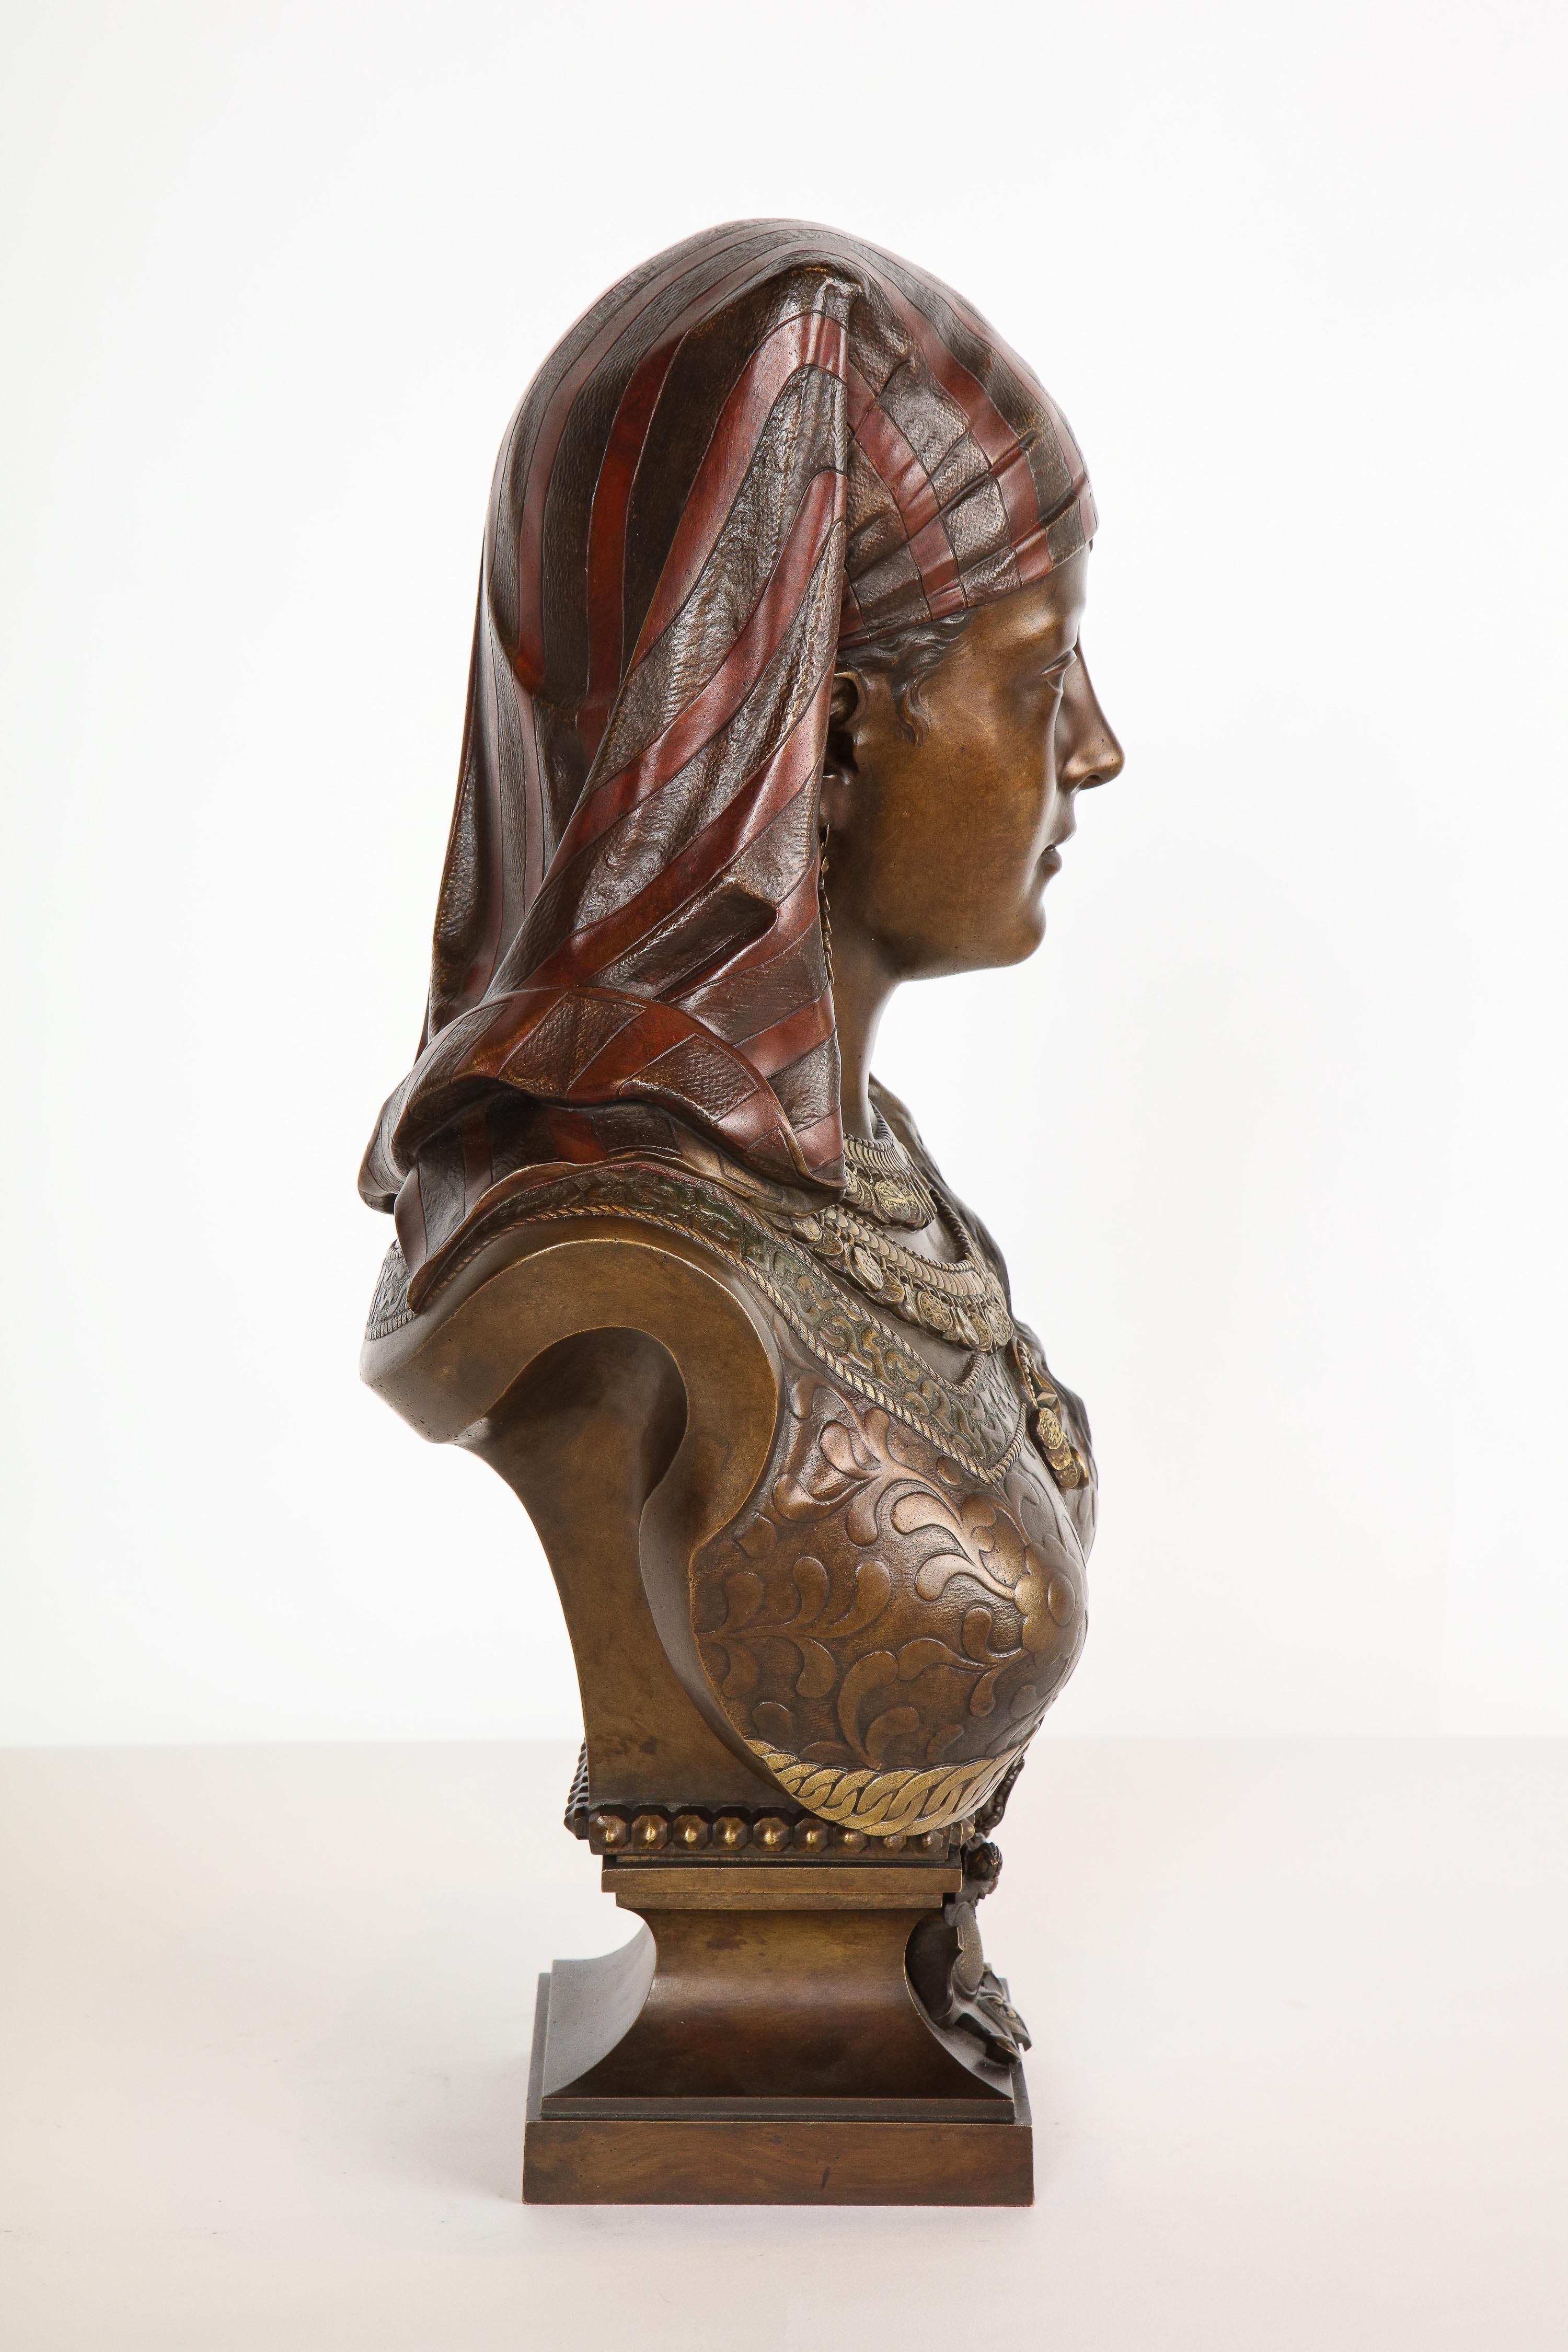 An Exquisite French Multi-Patinated Orientalist Bronze Bust of Saida, by Rimbez 4